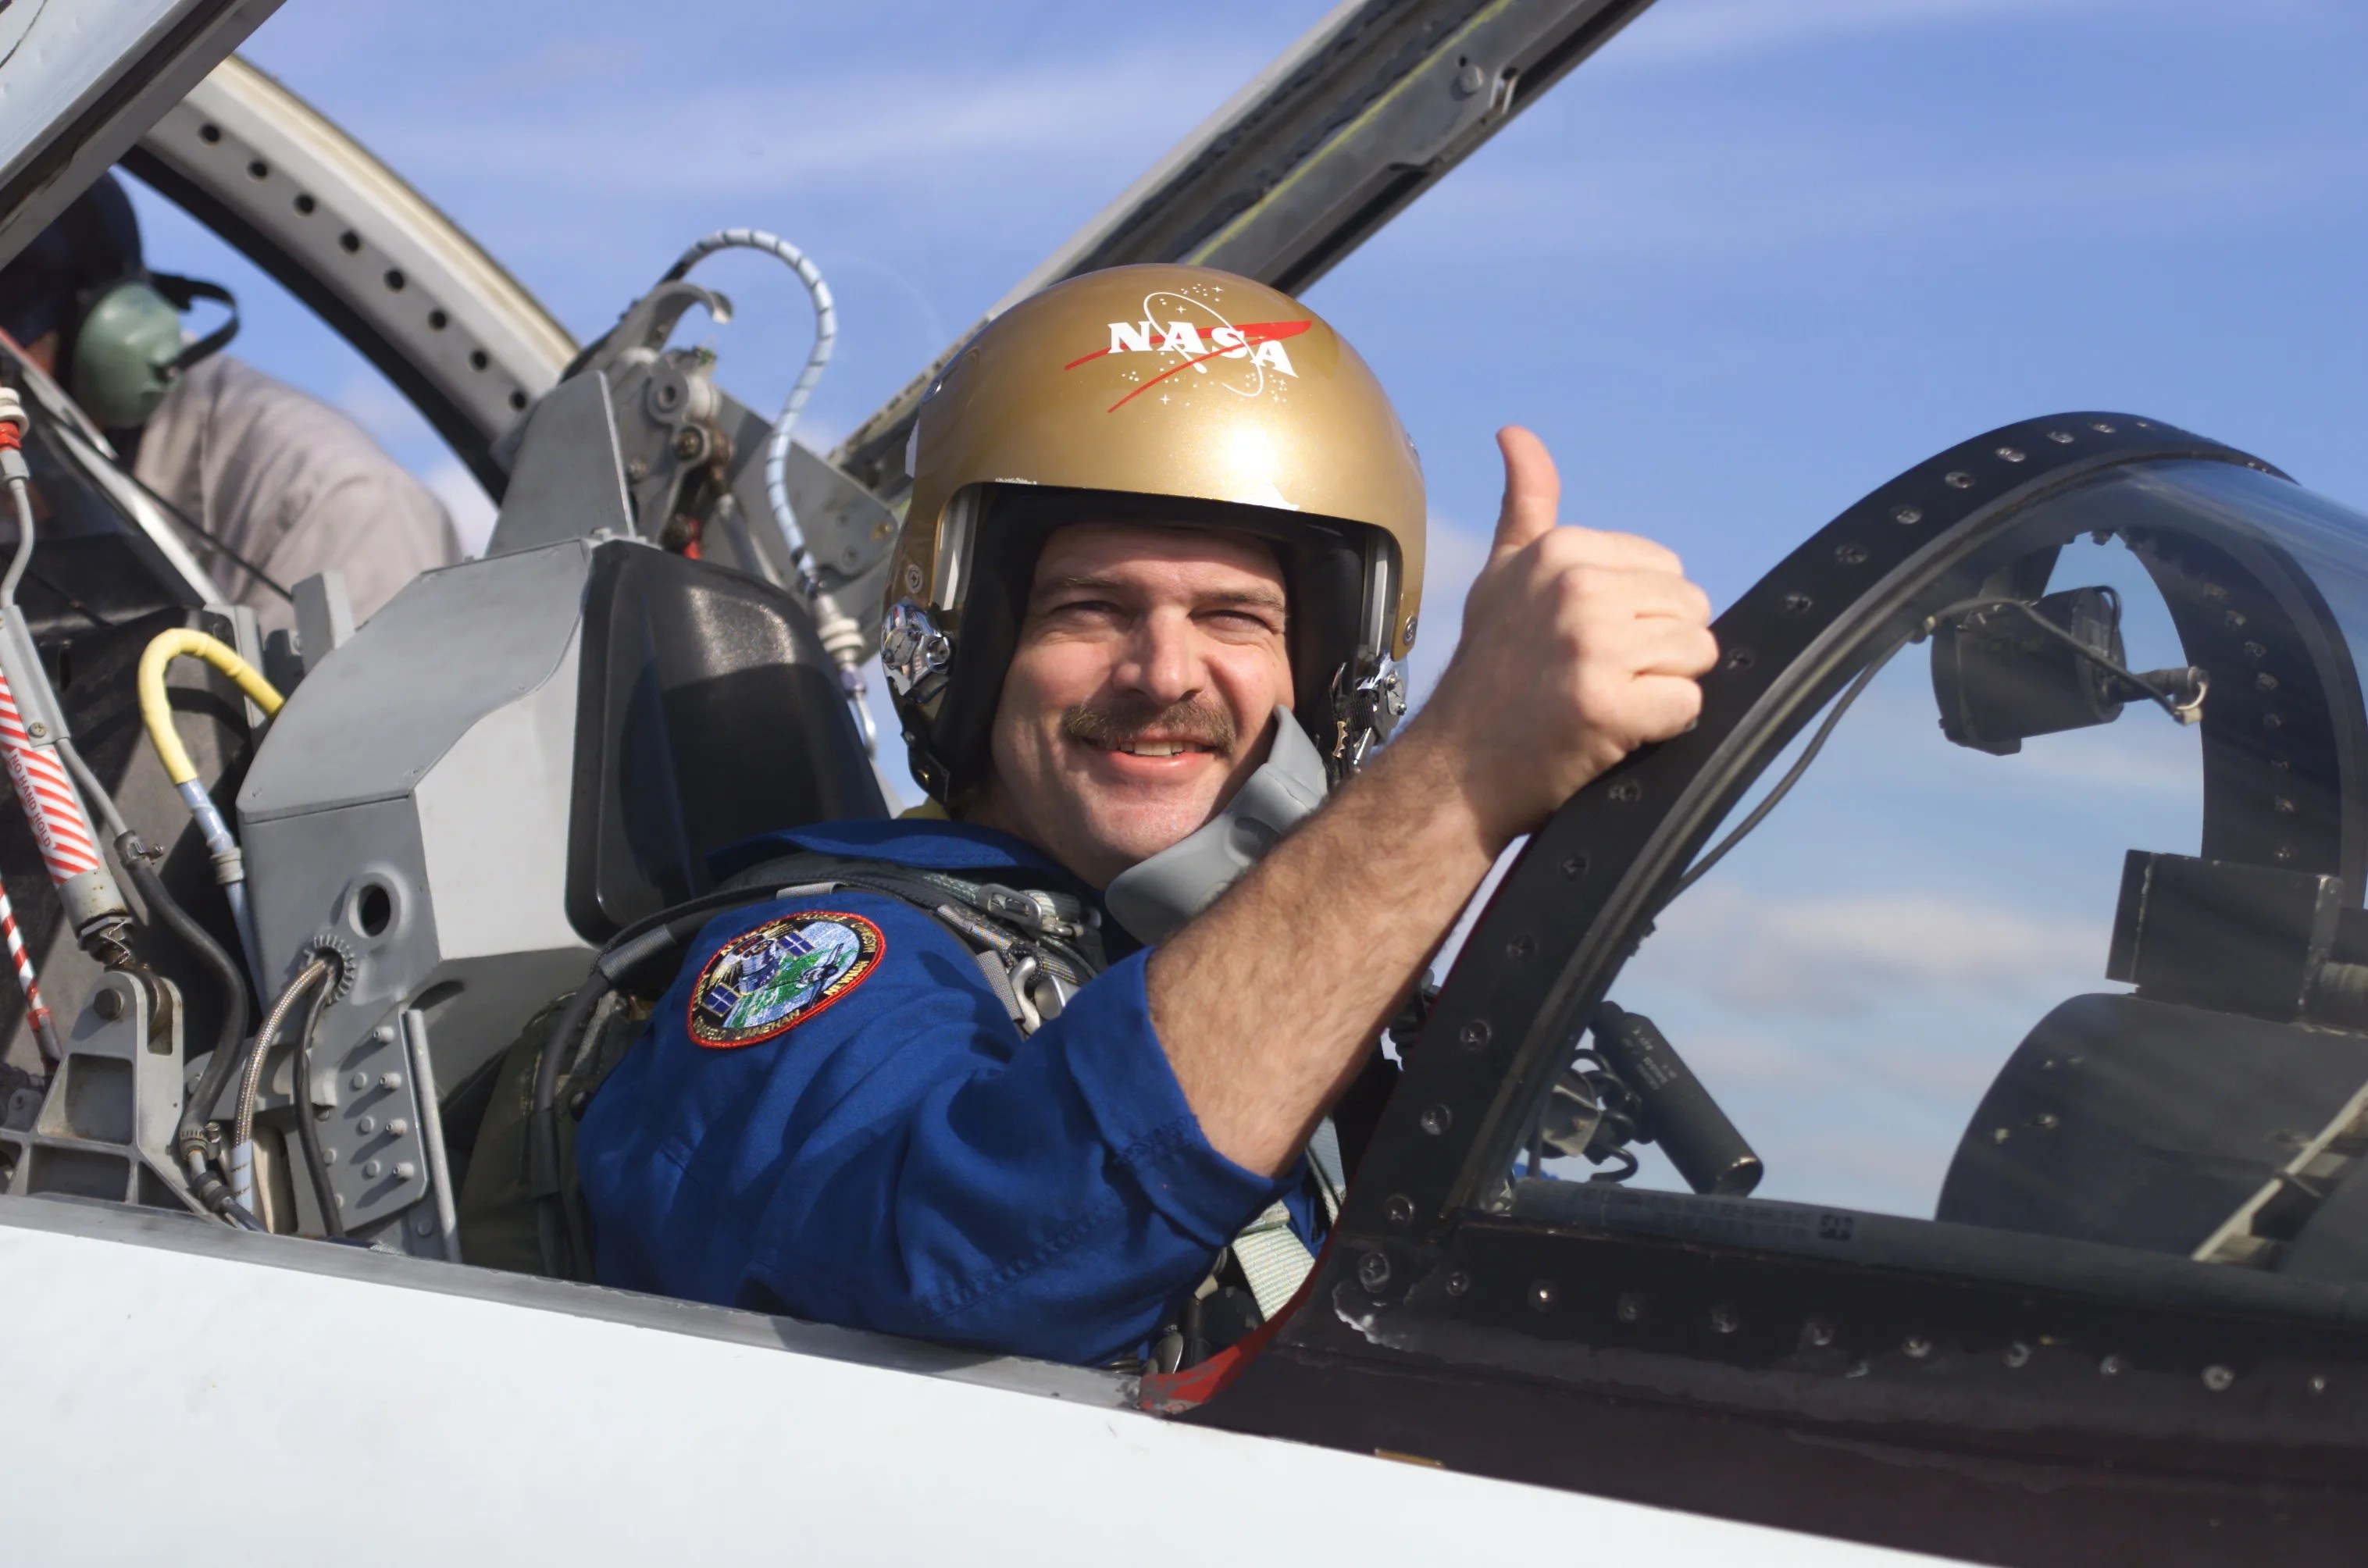 Astronaut Scott Altman sits in the cockpit of a plane, shooting a thumbs-up to the camera.